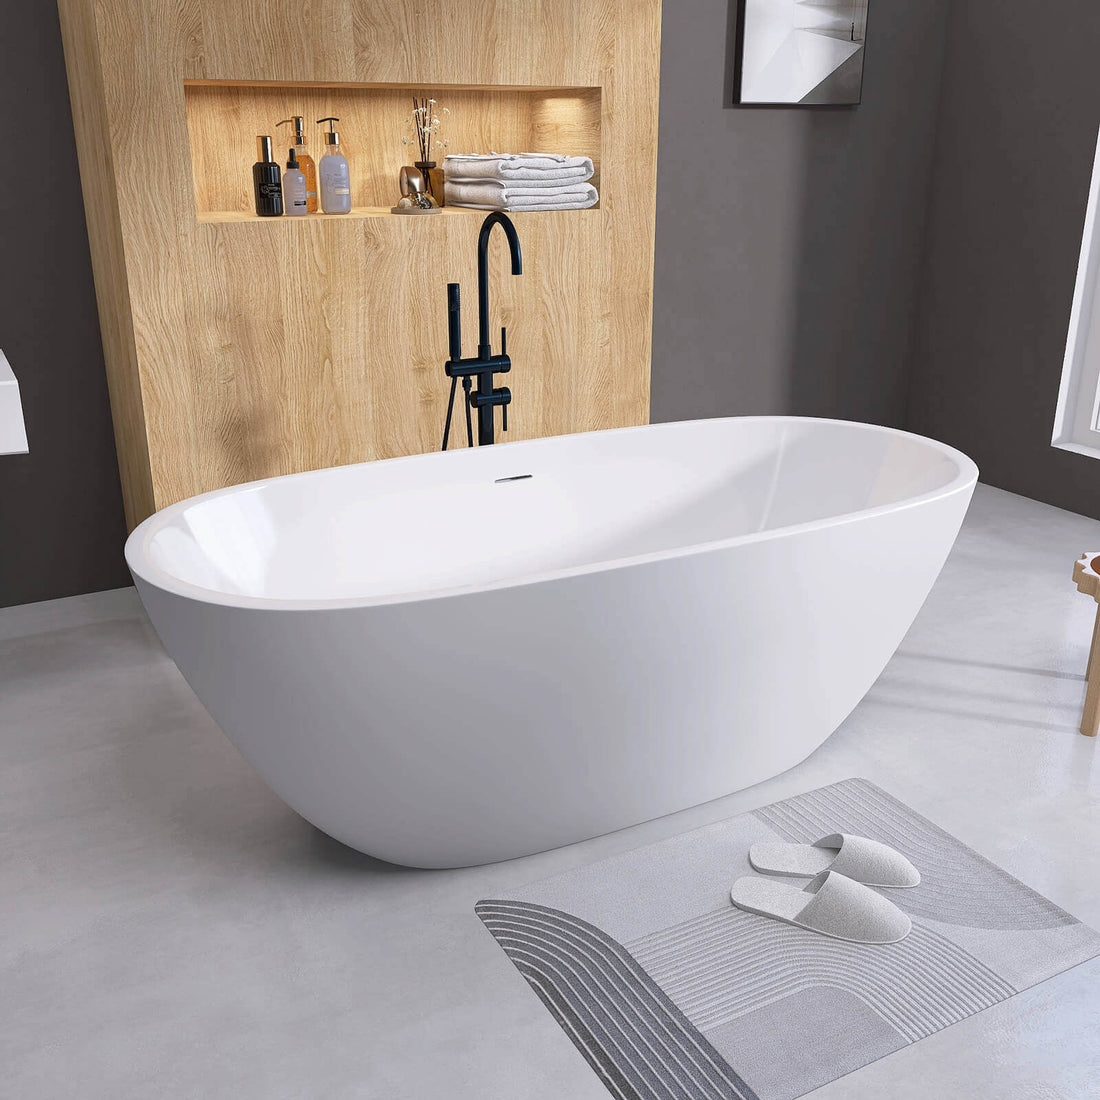 55 inch Matte White Oval free standing tub